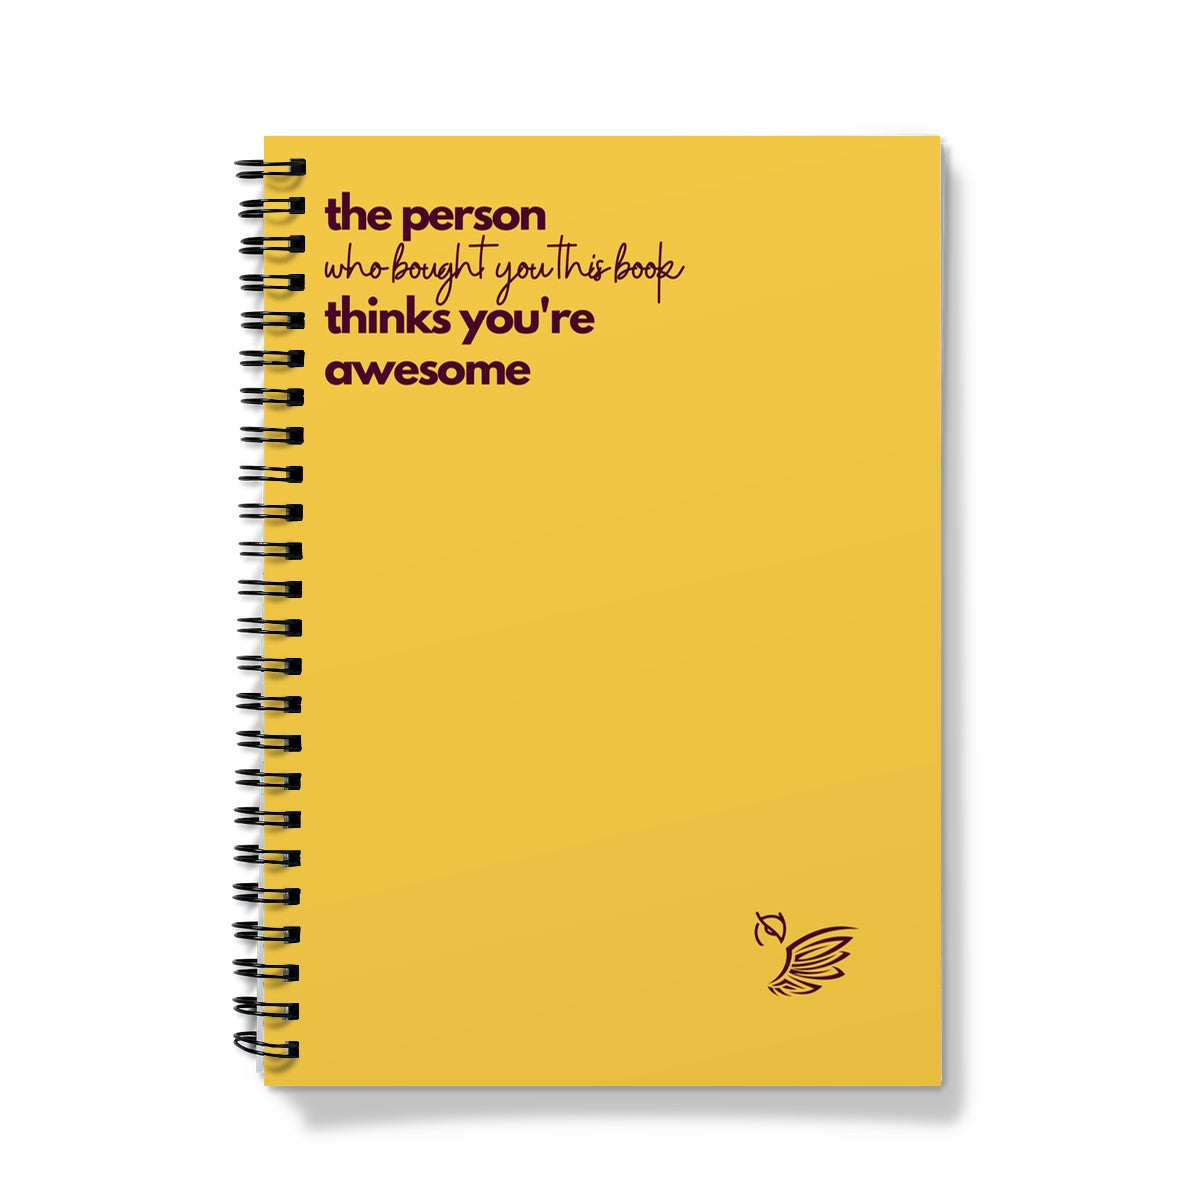 The Person Who Bought You This Book Thinks You're Awesome - Yellow Notebook